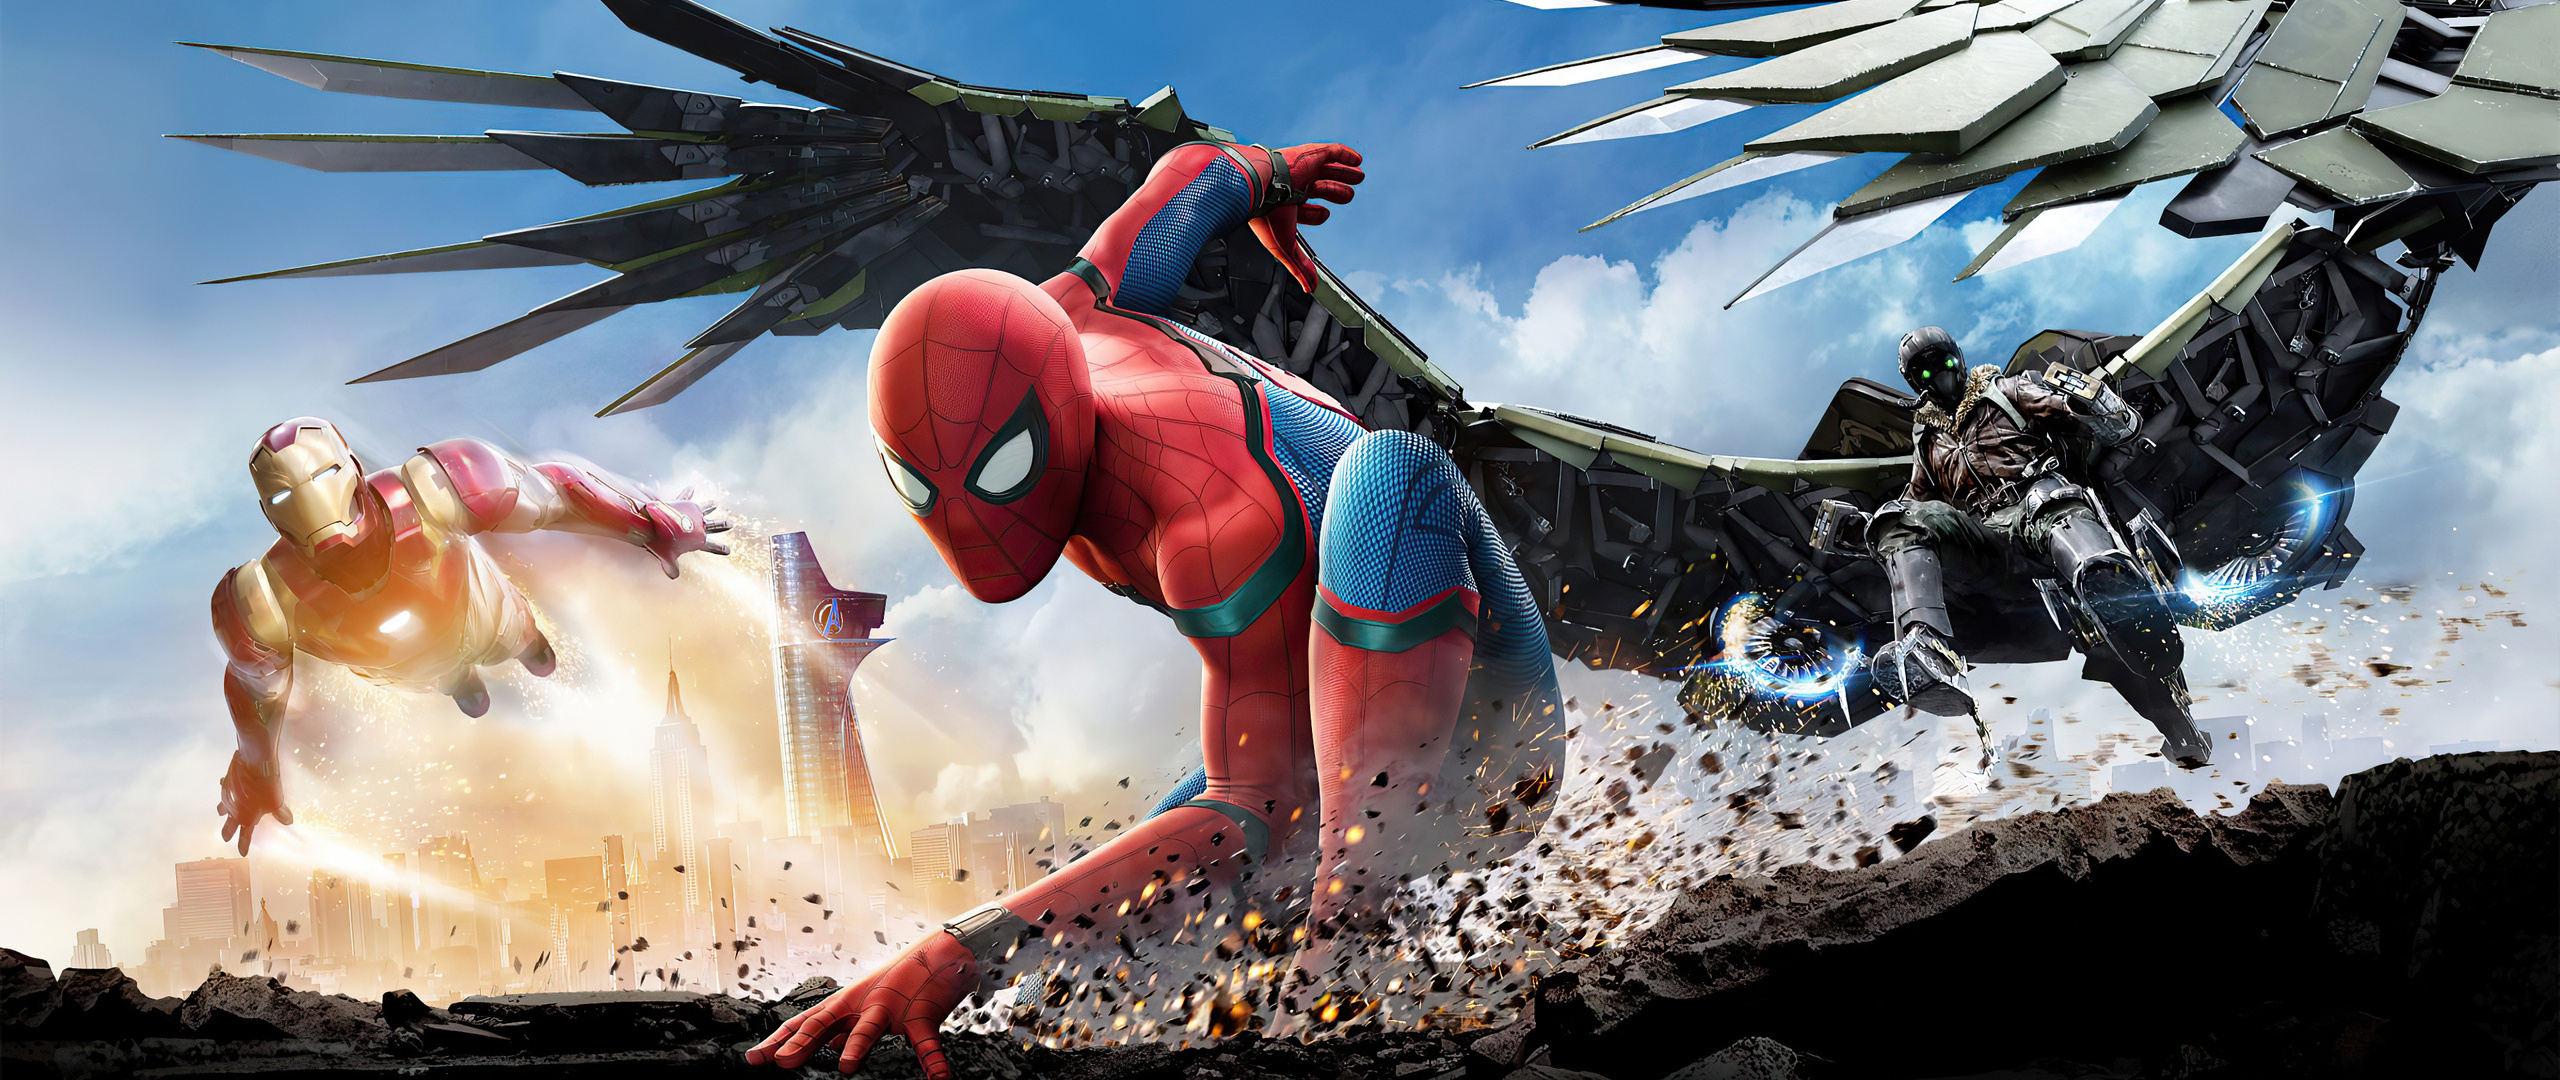 Spider-Man, Homecoming movie, High-definition images, Wall-crawling hero, 2560x1080 Dual Screen Desktop